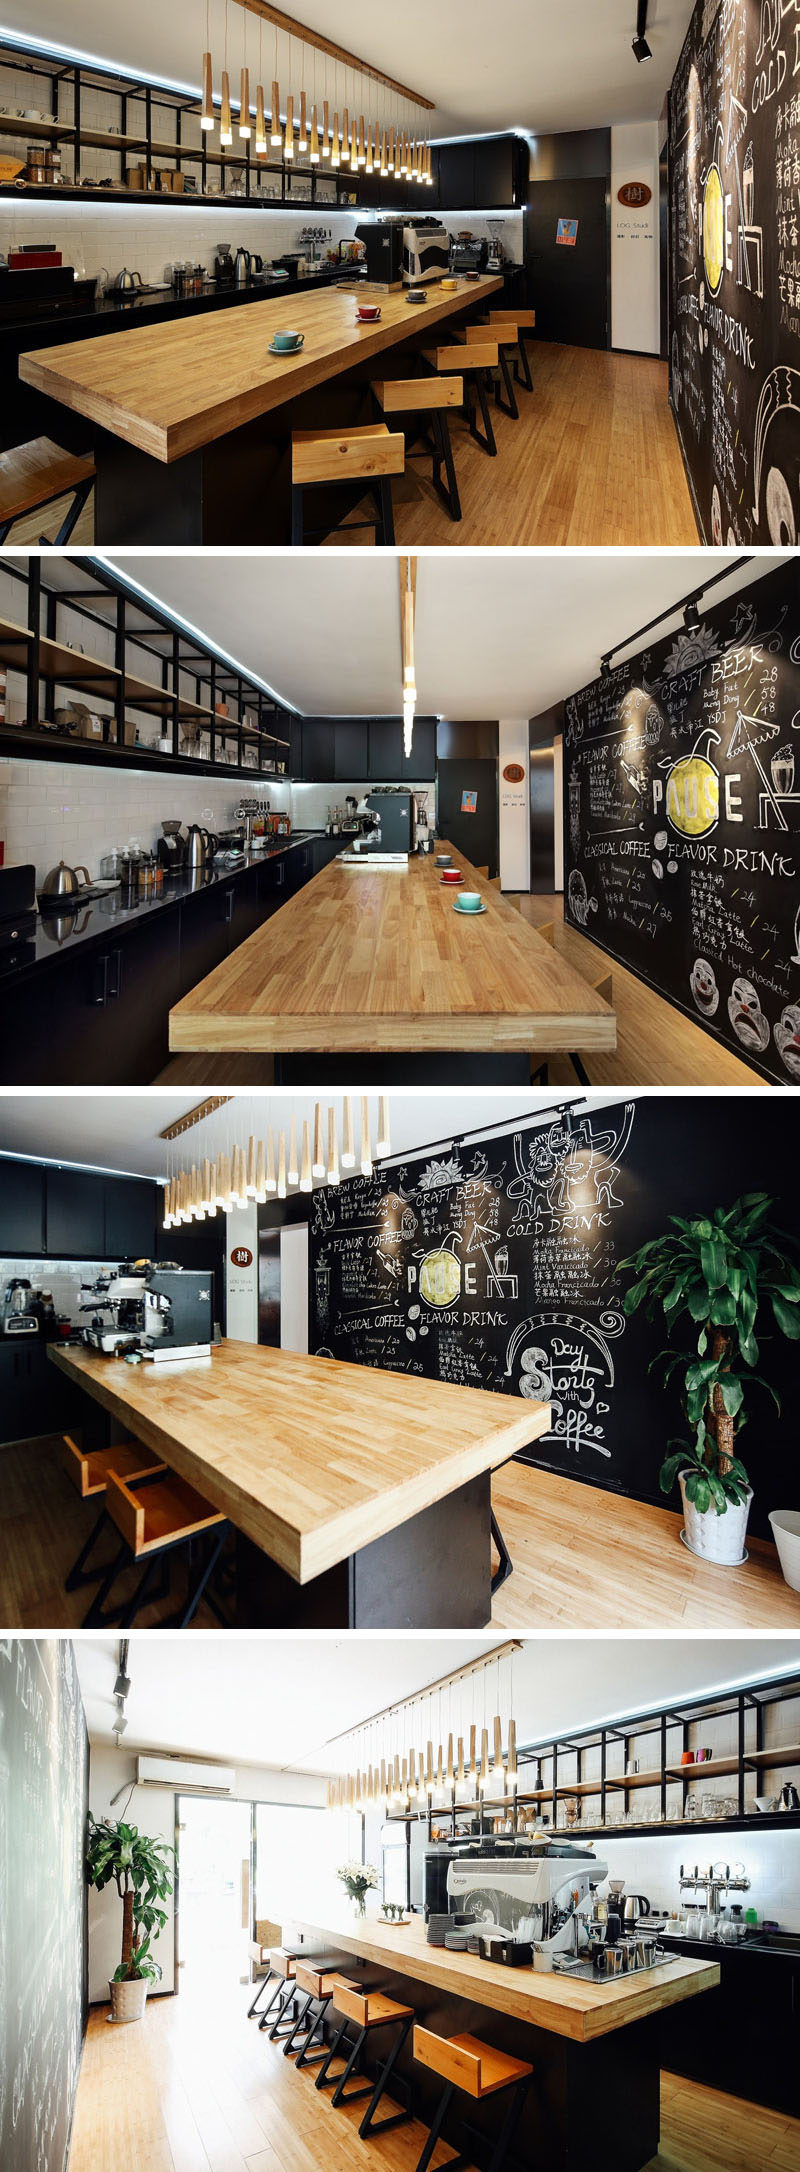 The black and bamboo theme has been carried throughout the interior of this modern coffee shop, with a thick wood countertop and wood floors / seating. Matte black cabinets and shelving compliment the black chalkboard wall on the other side of the bar. #CoffeeShop #Cafe #ModernCoffeeShop #RetailDesign #InteriorDesign